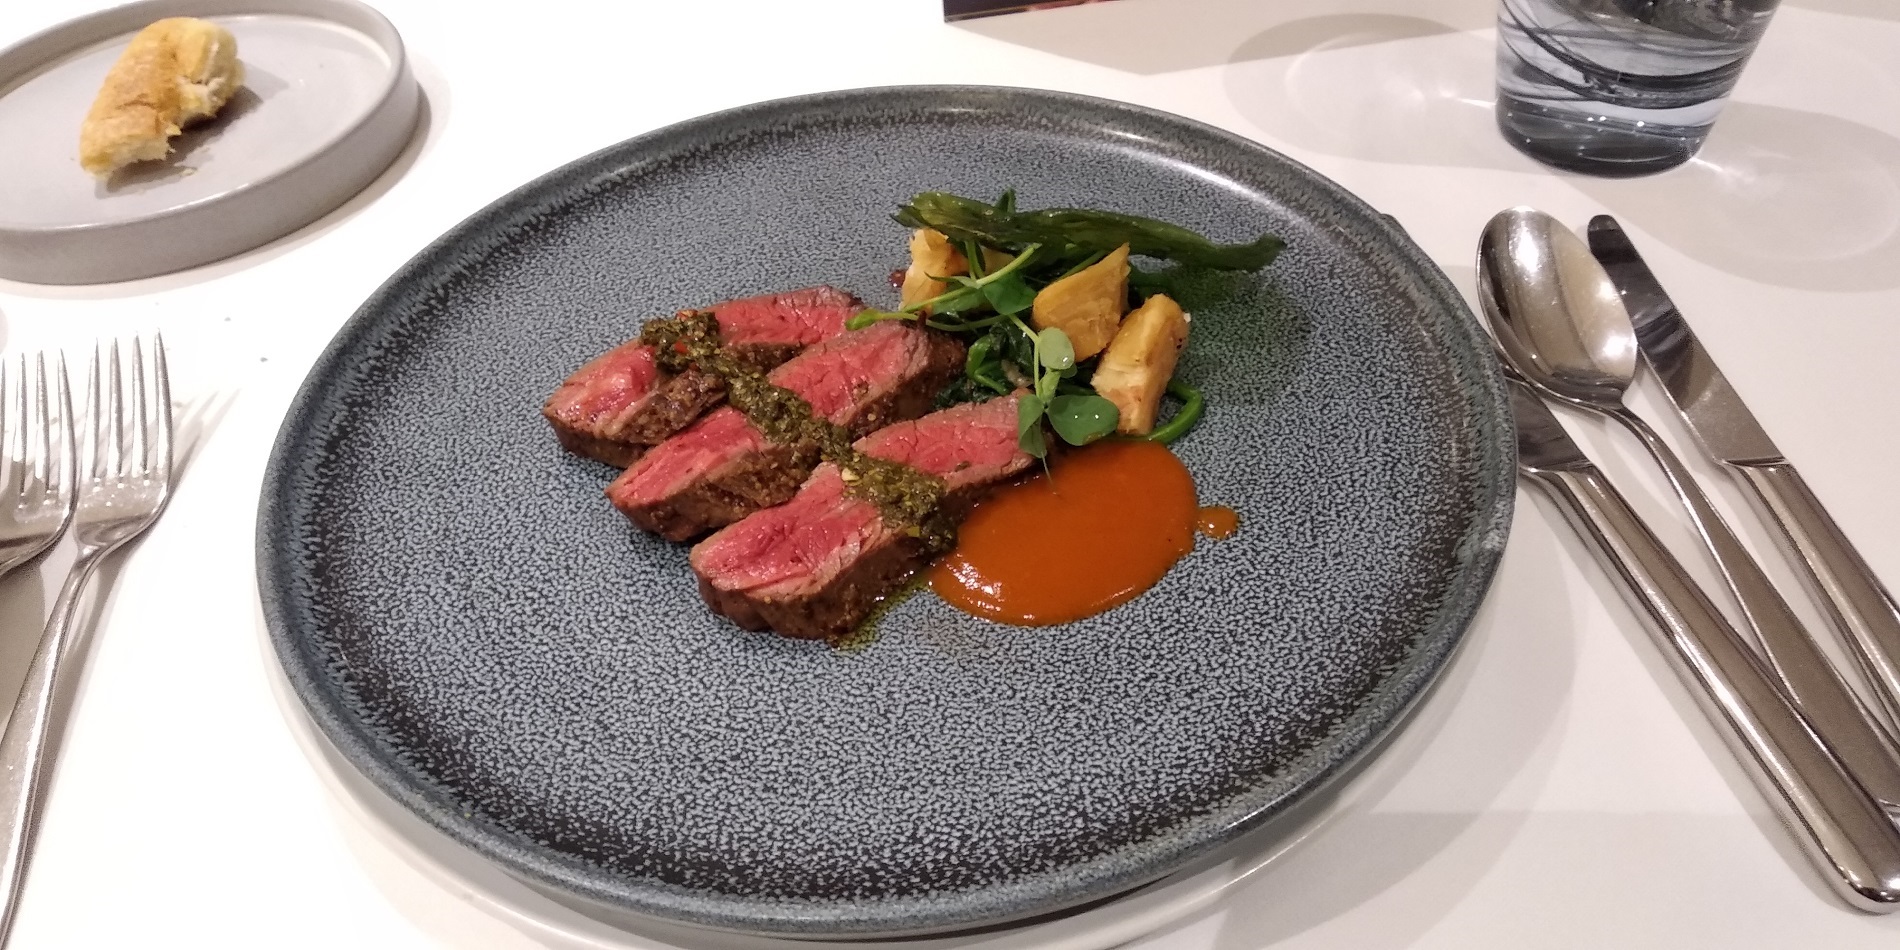 Seared pommery & rosemary wagyu flank 7+, wilted spinach & garlic, honey roasted red pepper coulis, chimichurri, micro coriander. (Fajar Sidik/Hypeabis.id)